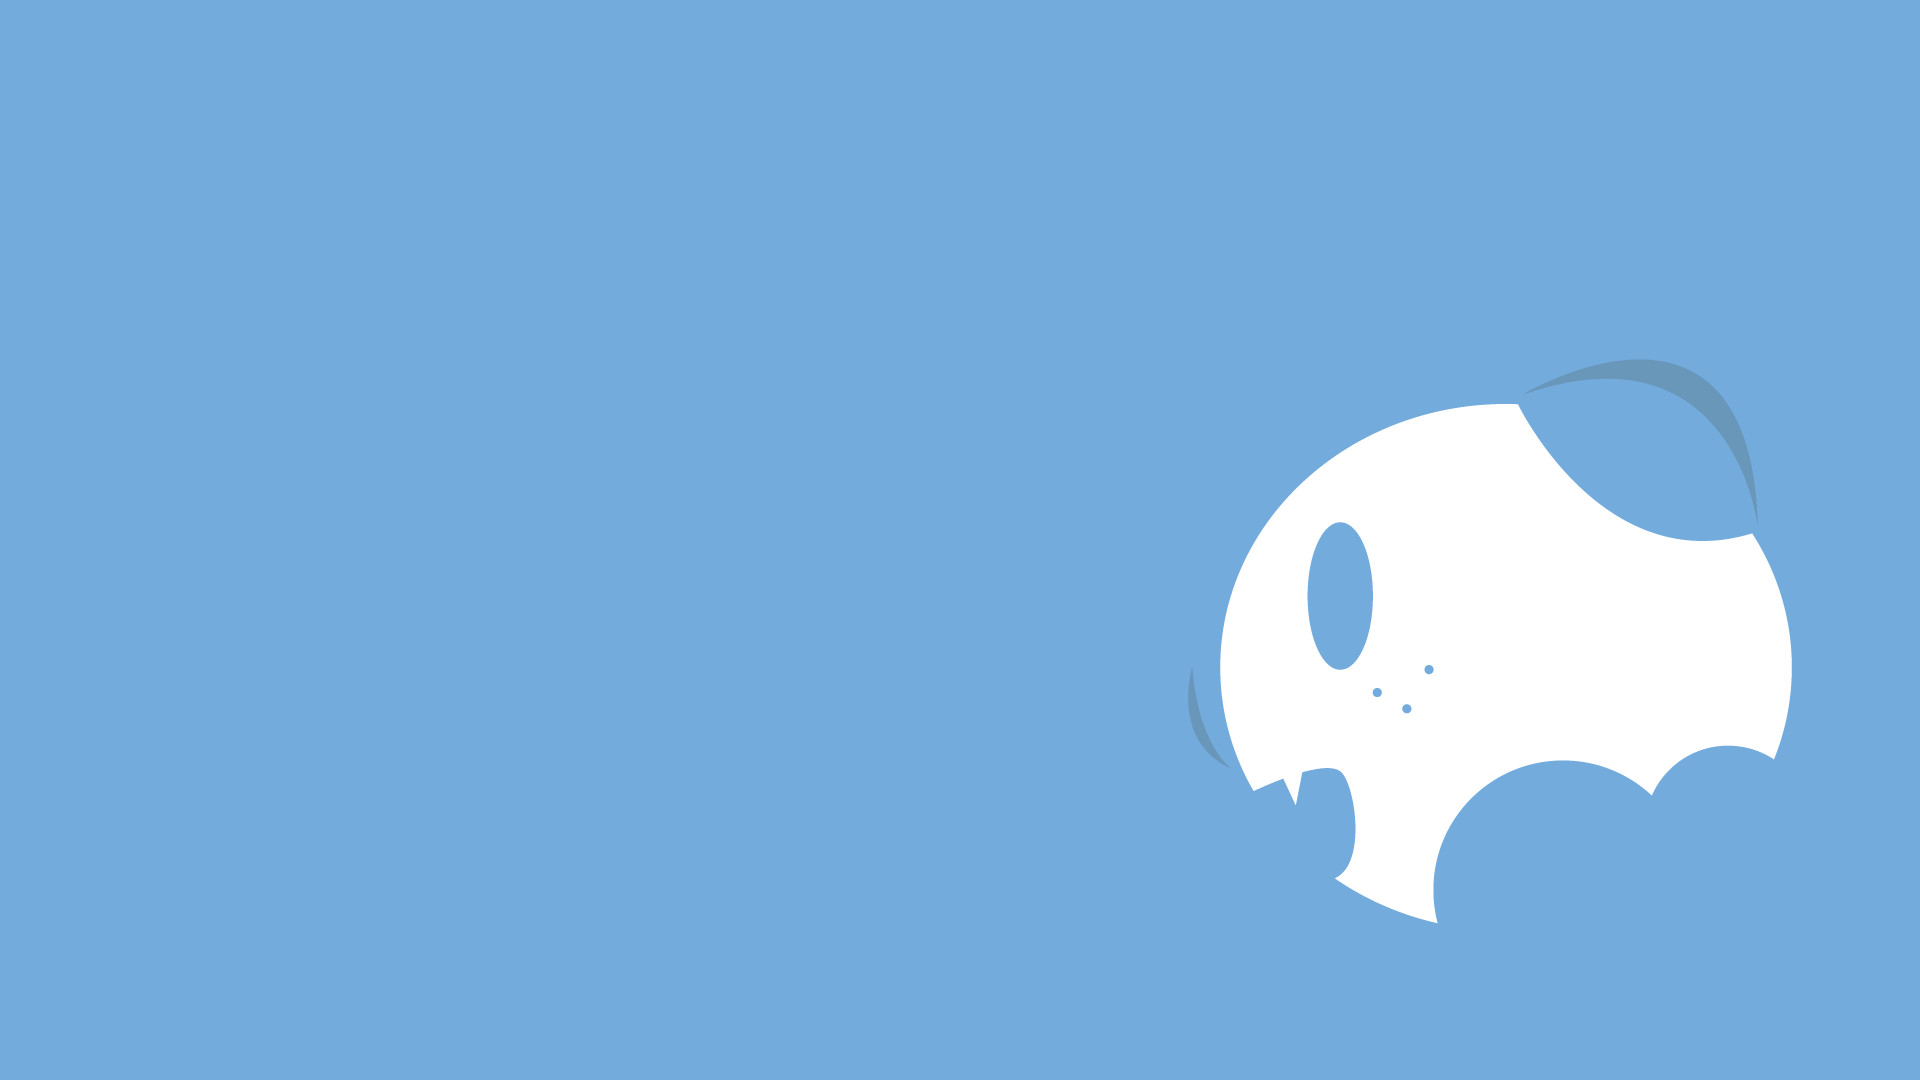 Minimalist wallpaper with a simple white skull on a blue background - Pokemon